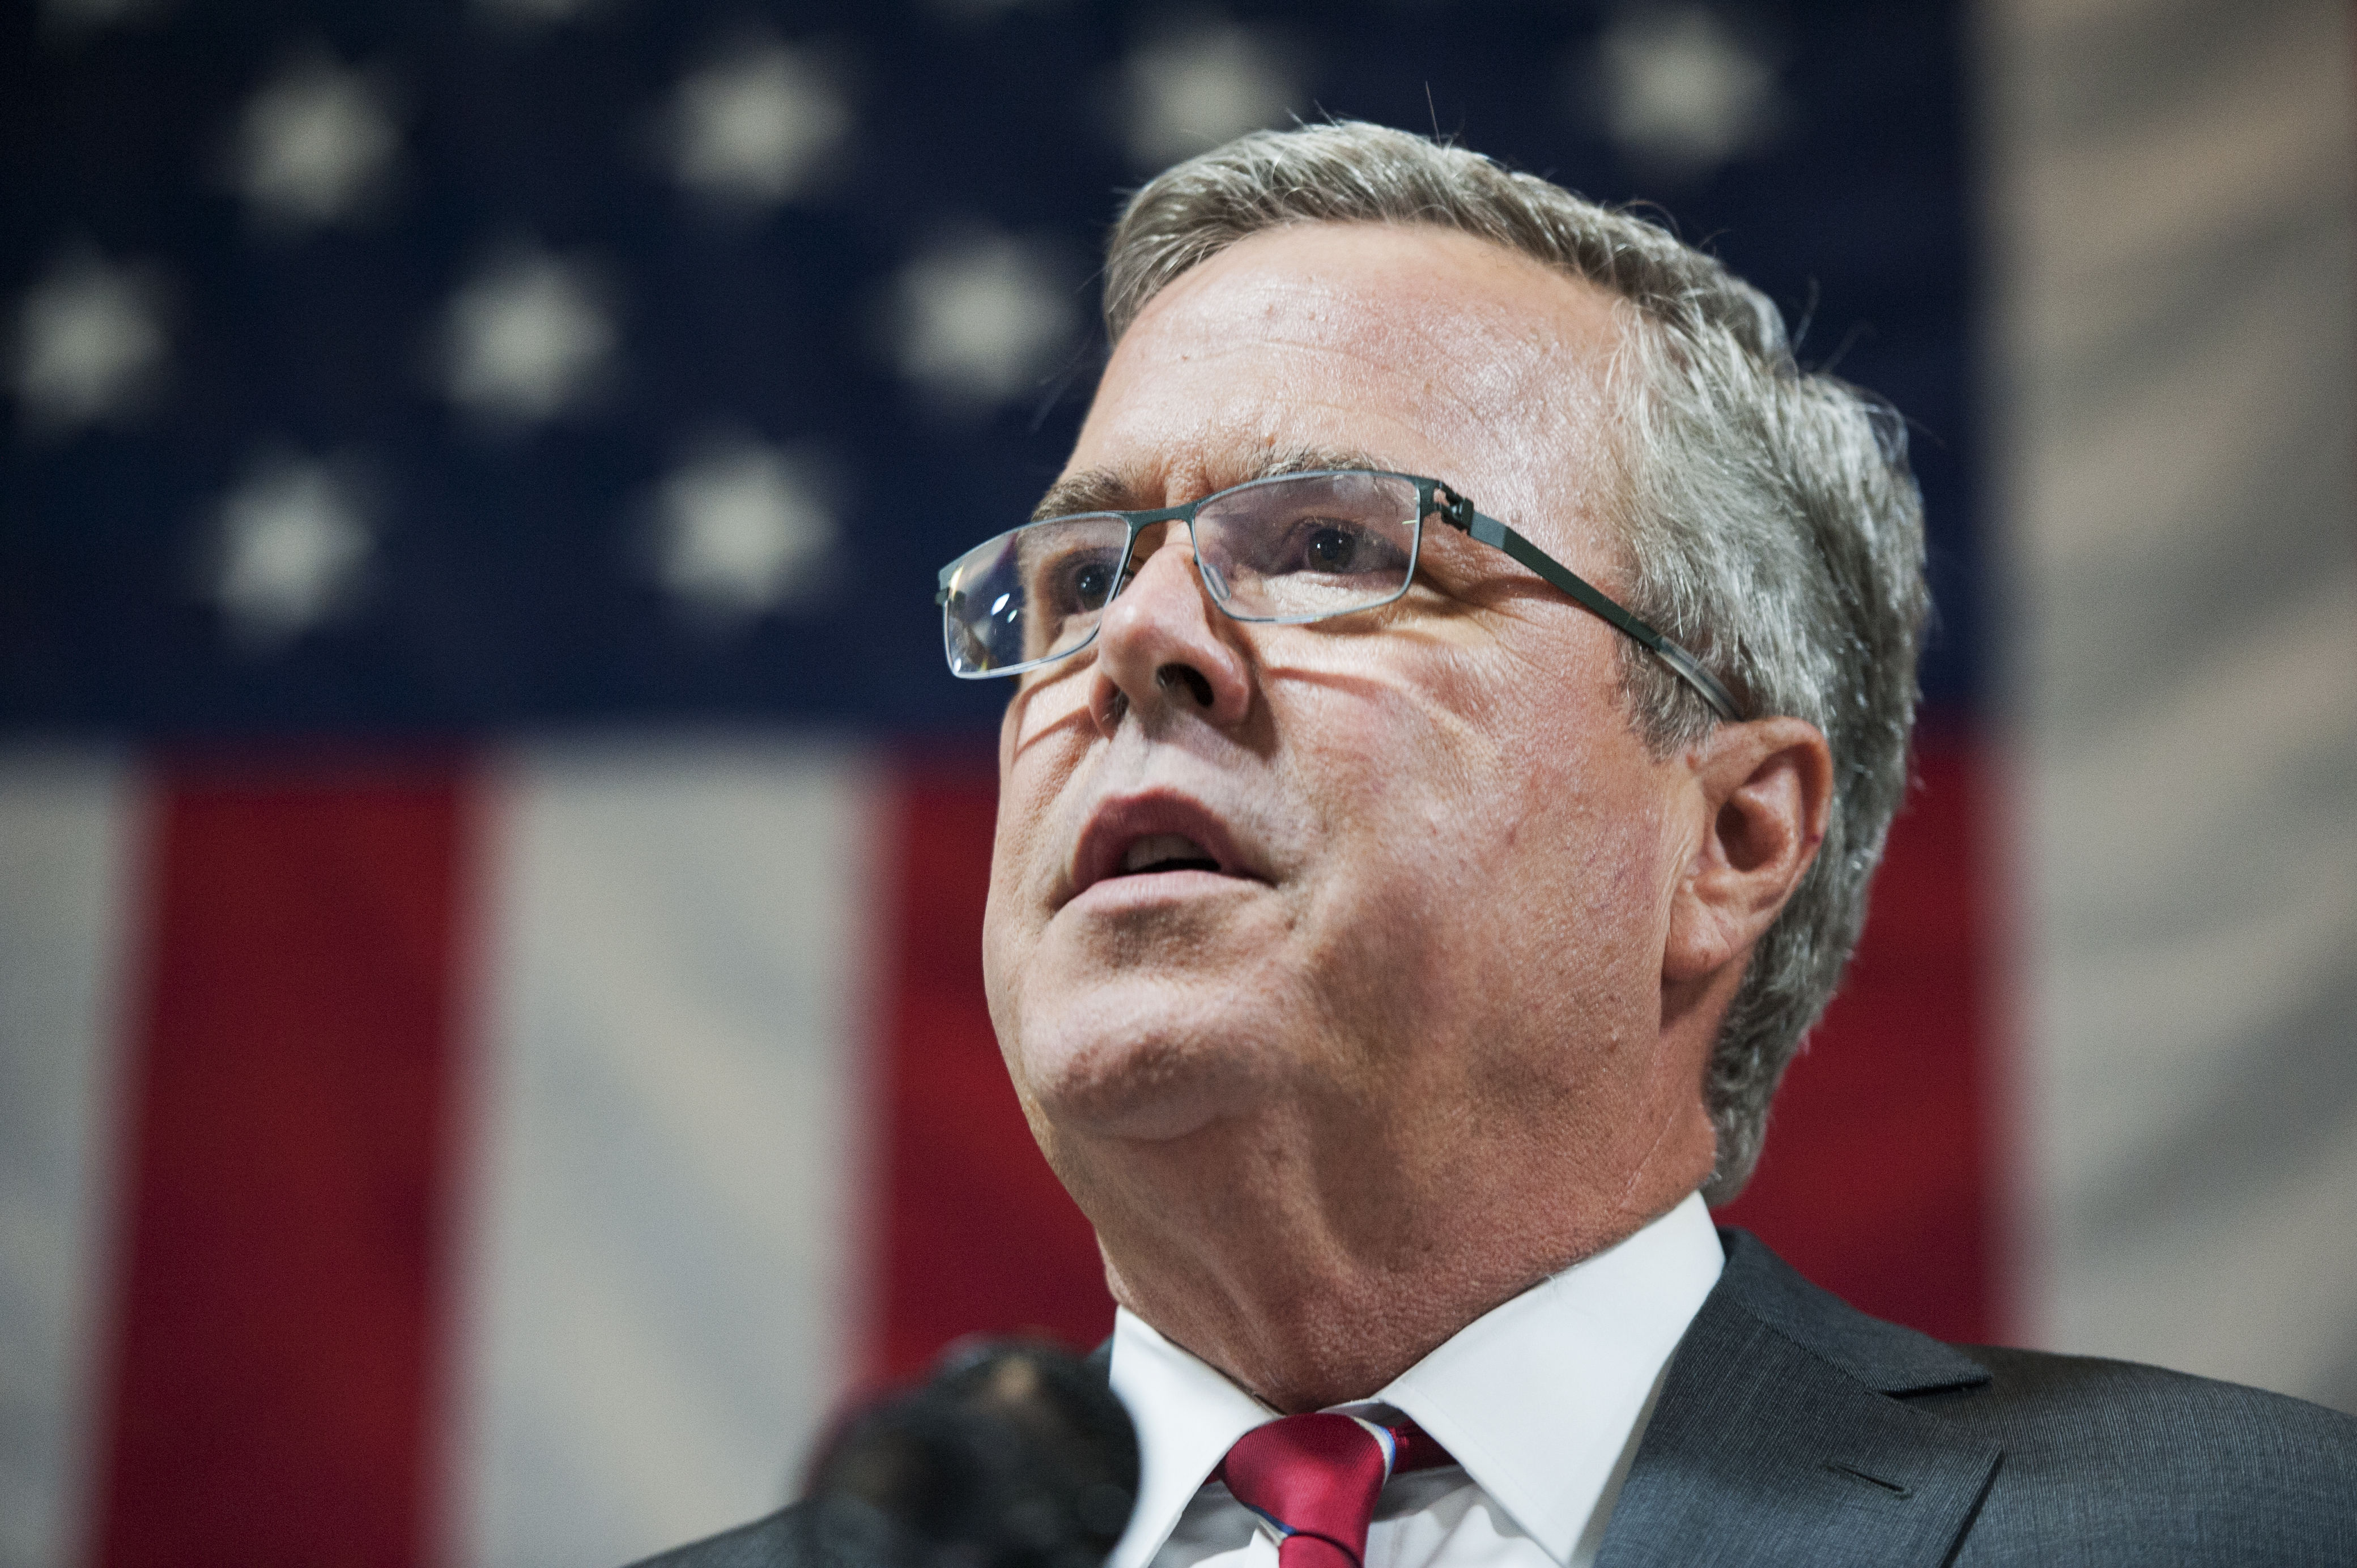 Former Florida Gov. Jeb Bush, speaks at an event at Illuminating Technologies Inc., in Greensboro, N.C. on Sept. 24, 2014.